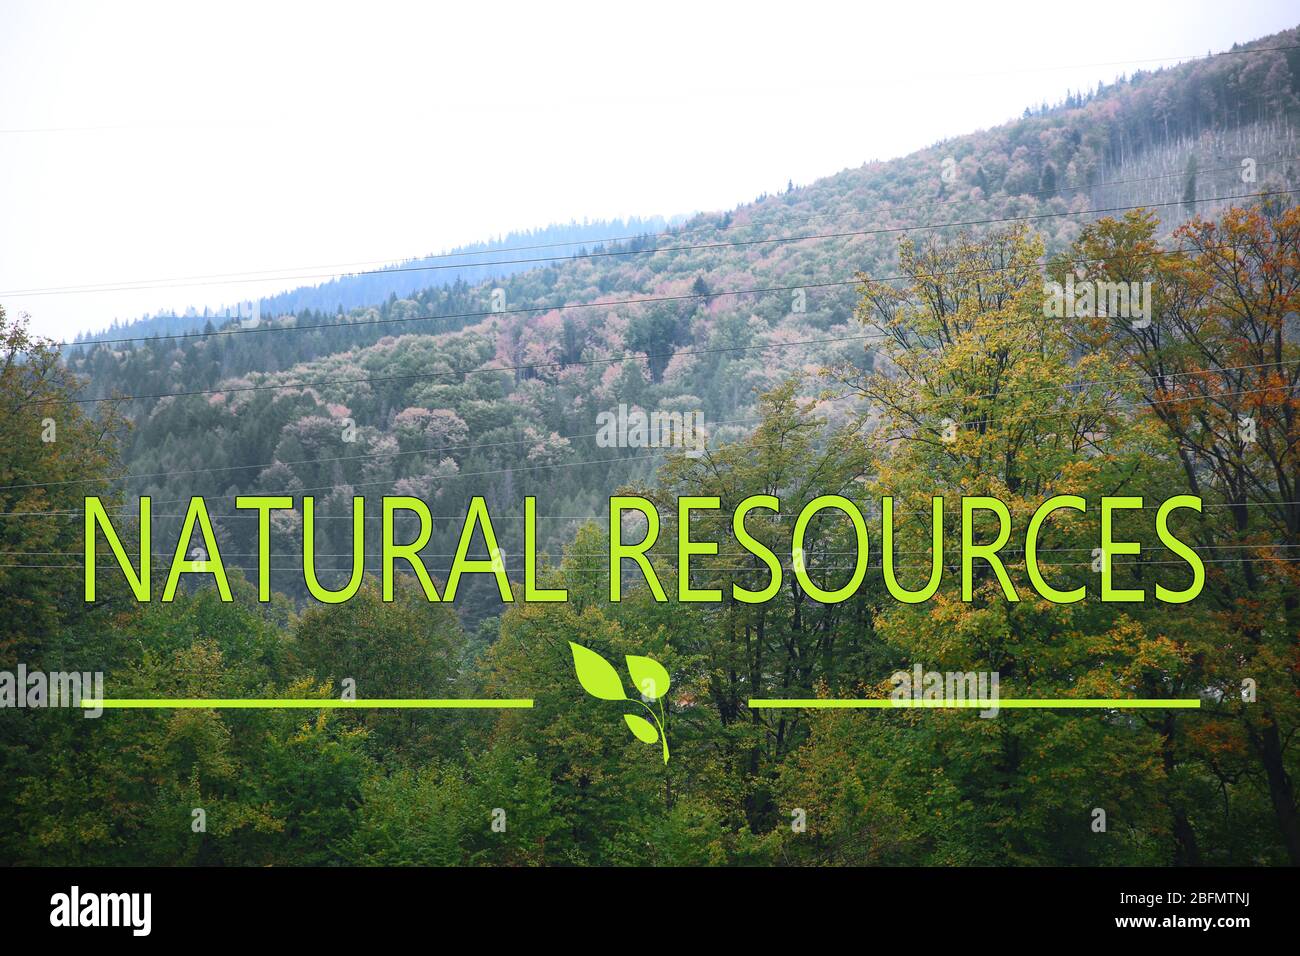 Save natural resources concept. Text on mountain forest background Stock Photo